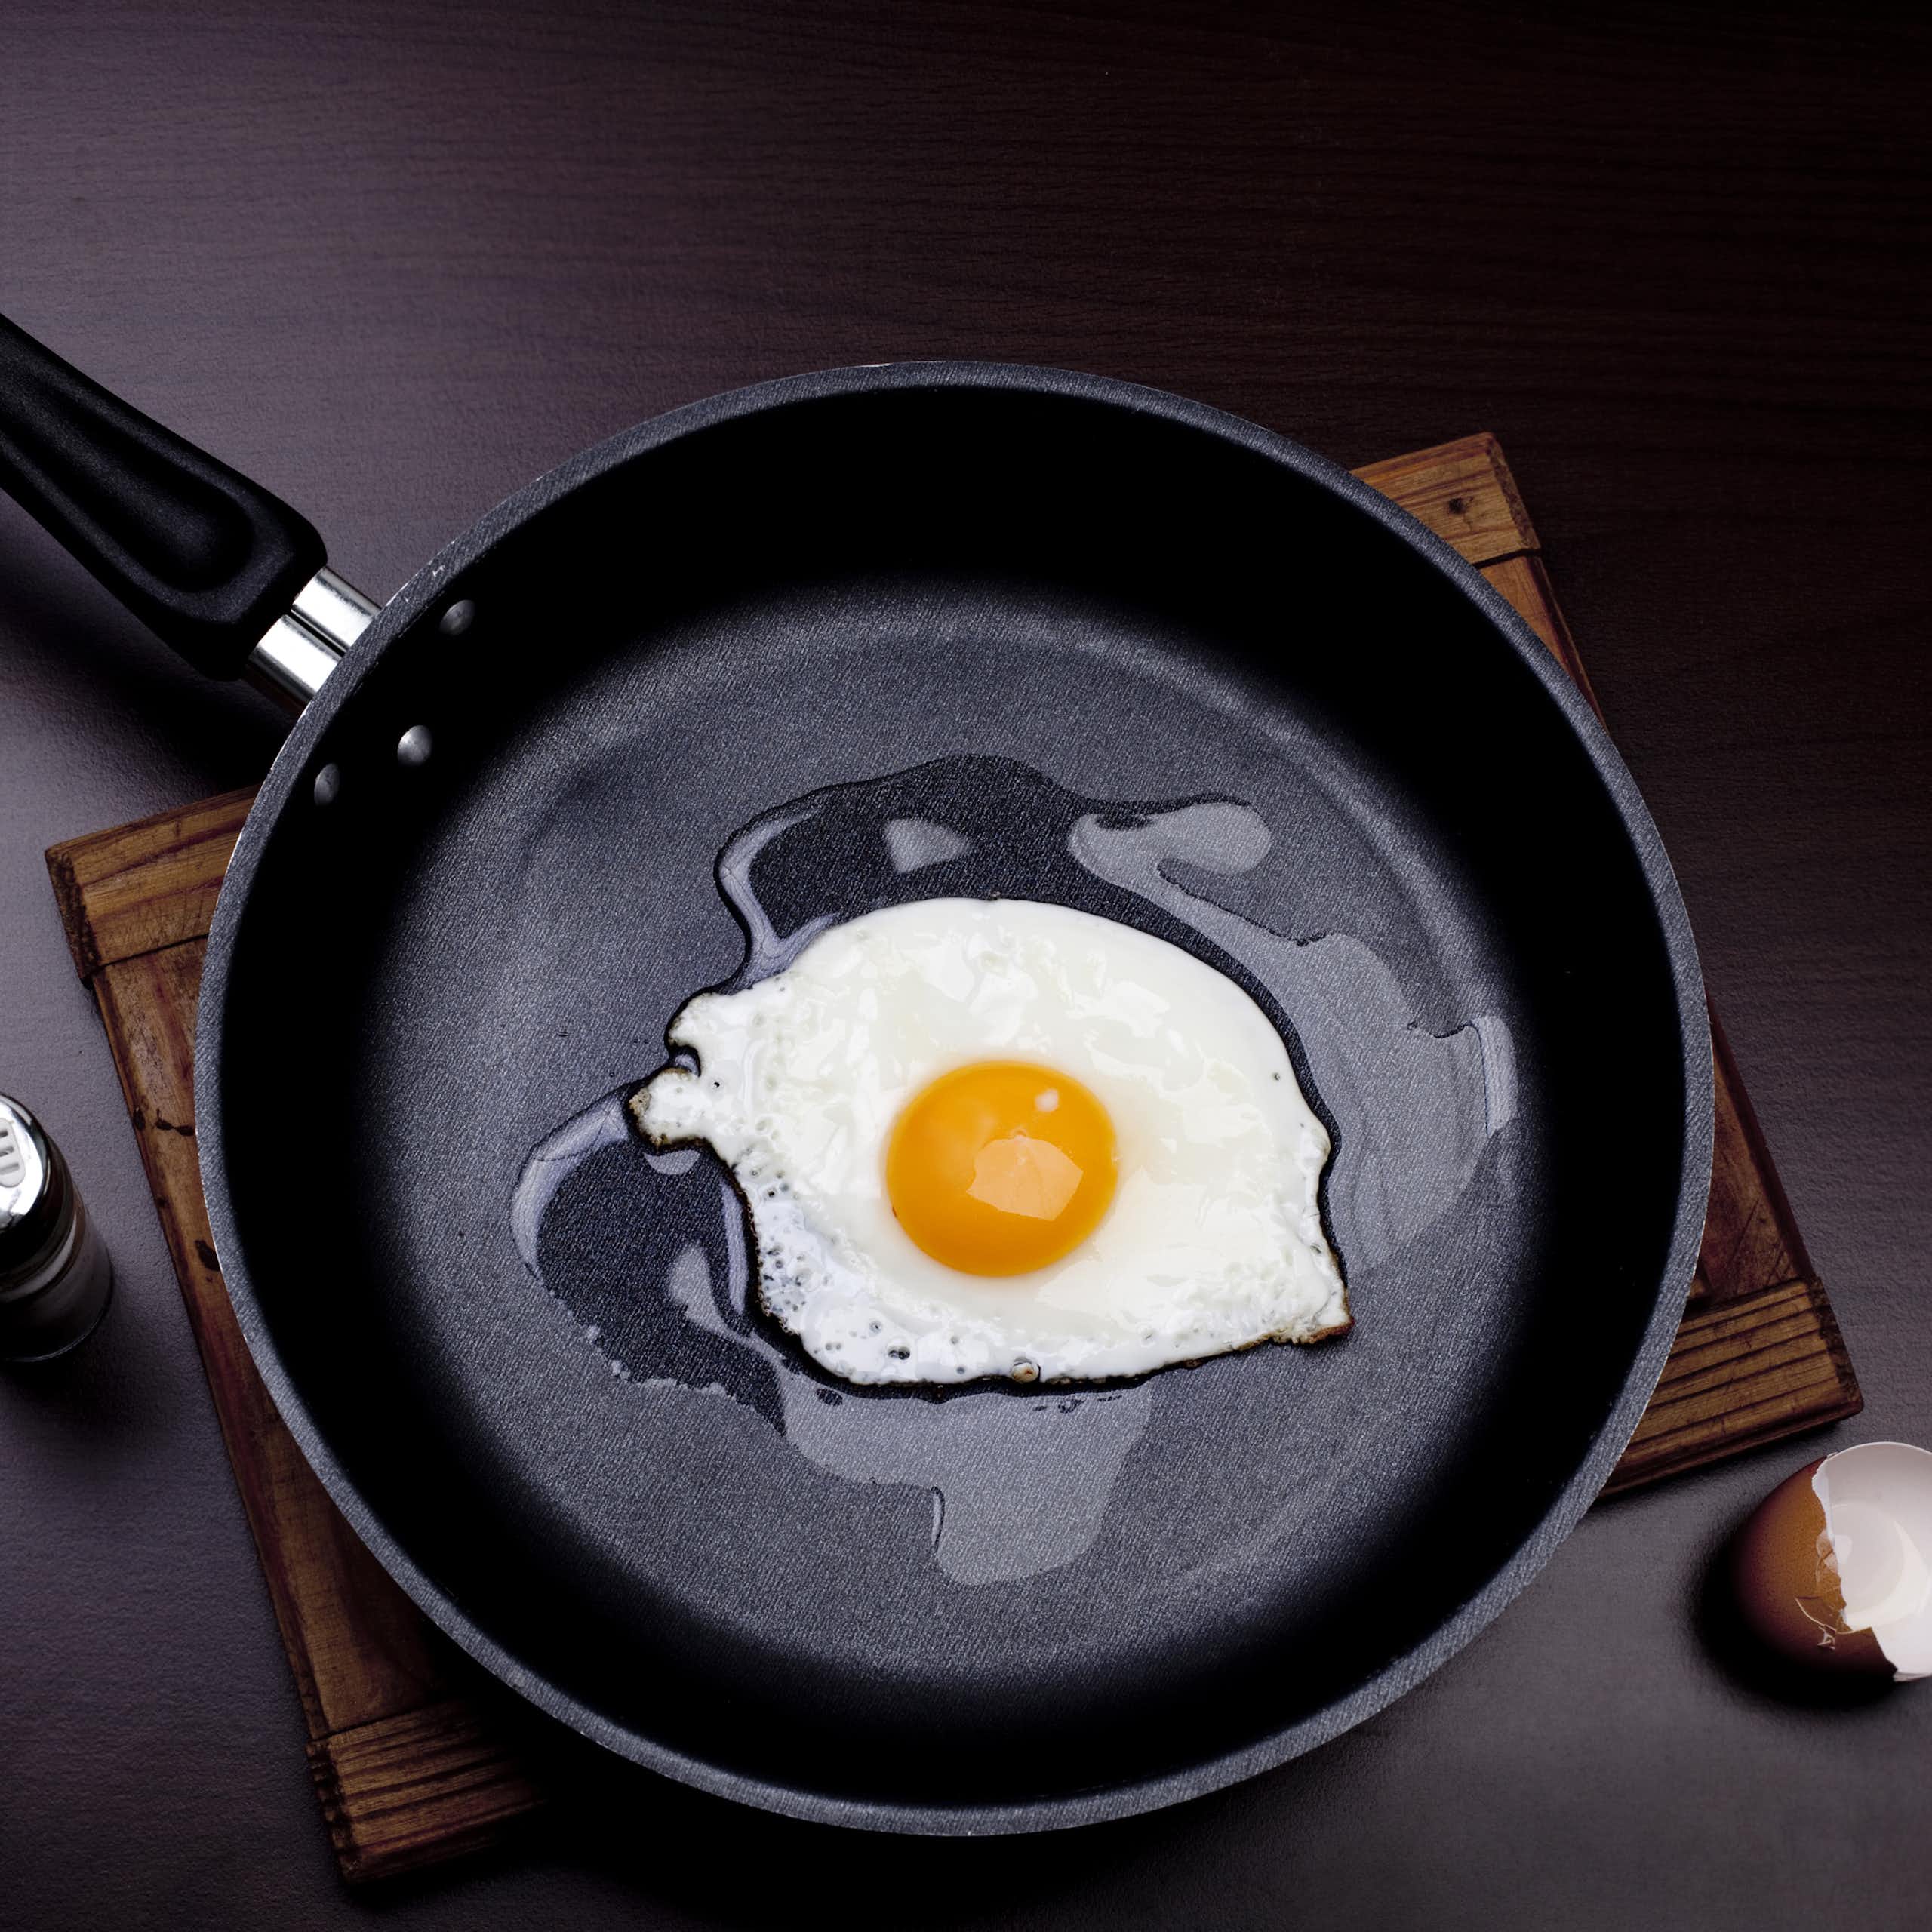 A black, non-stick pan is used to fry an egg.